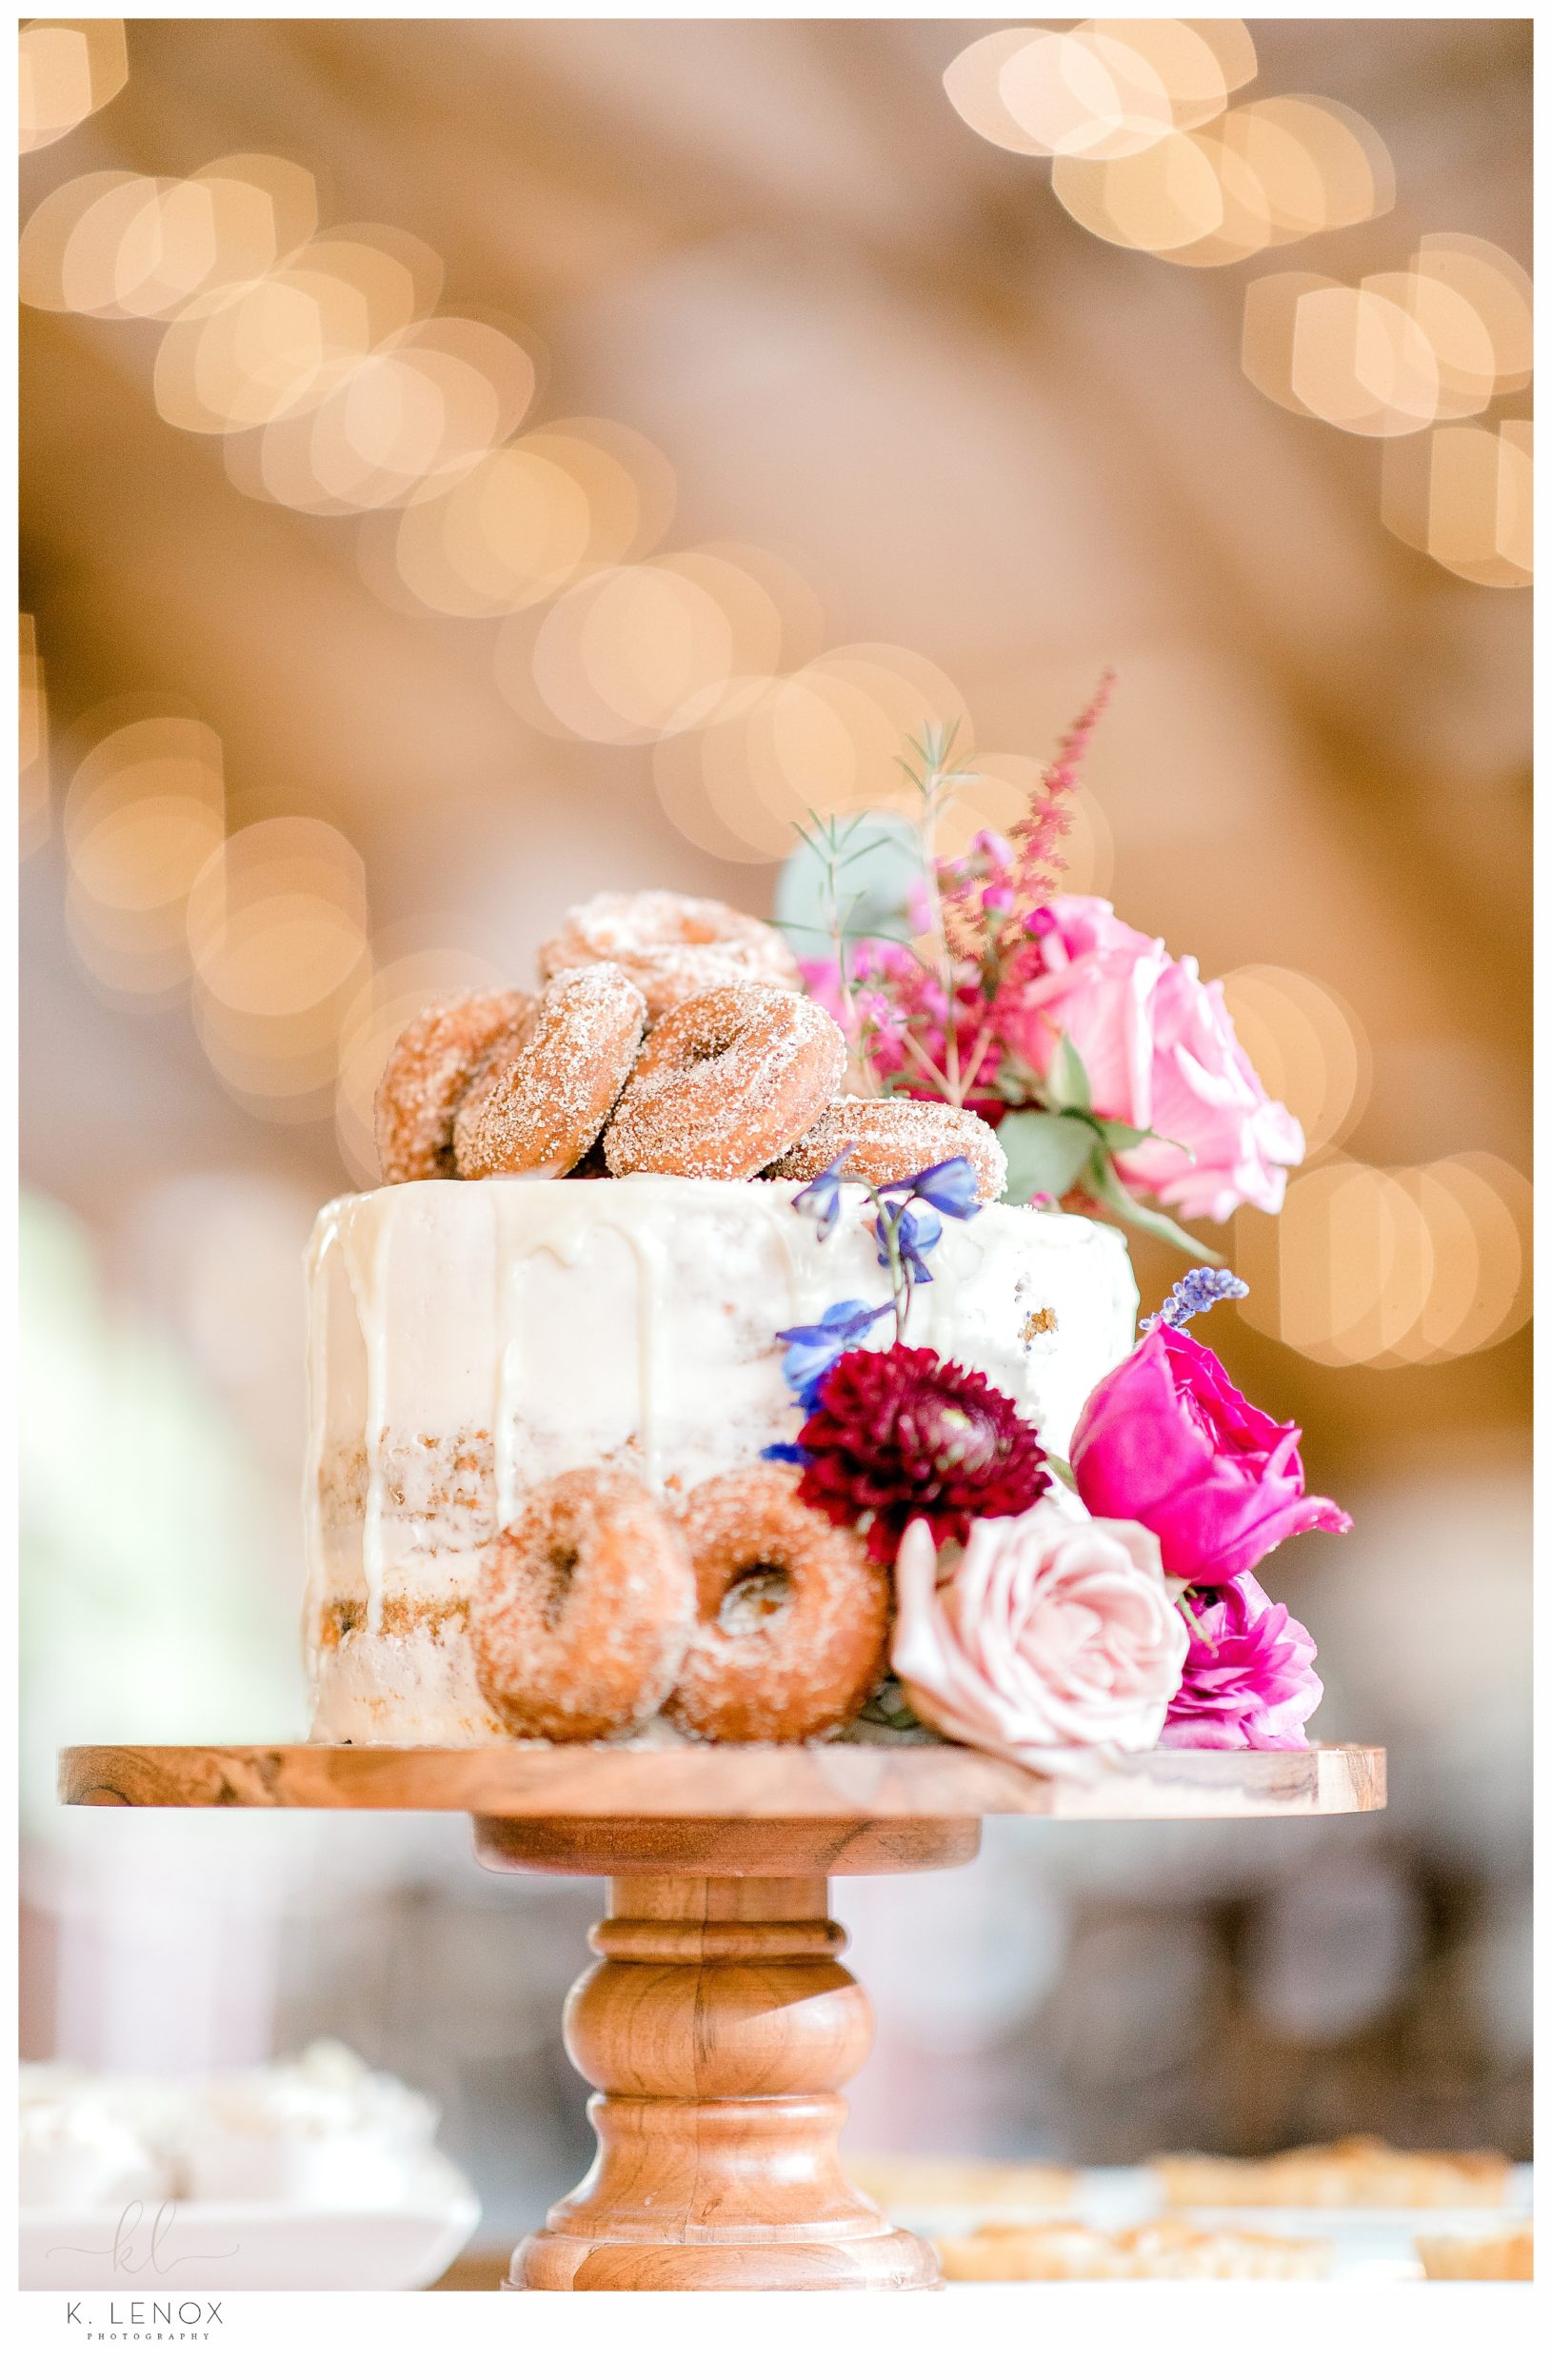 Tiered Wedding Cake decorated with flowers and Donuts. 